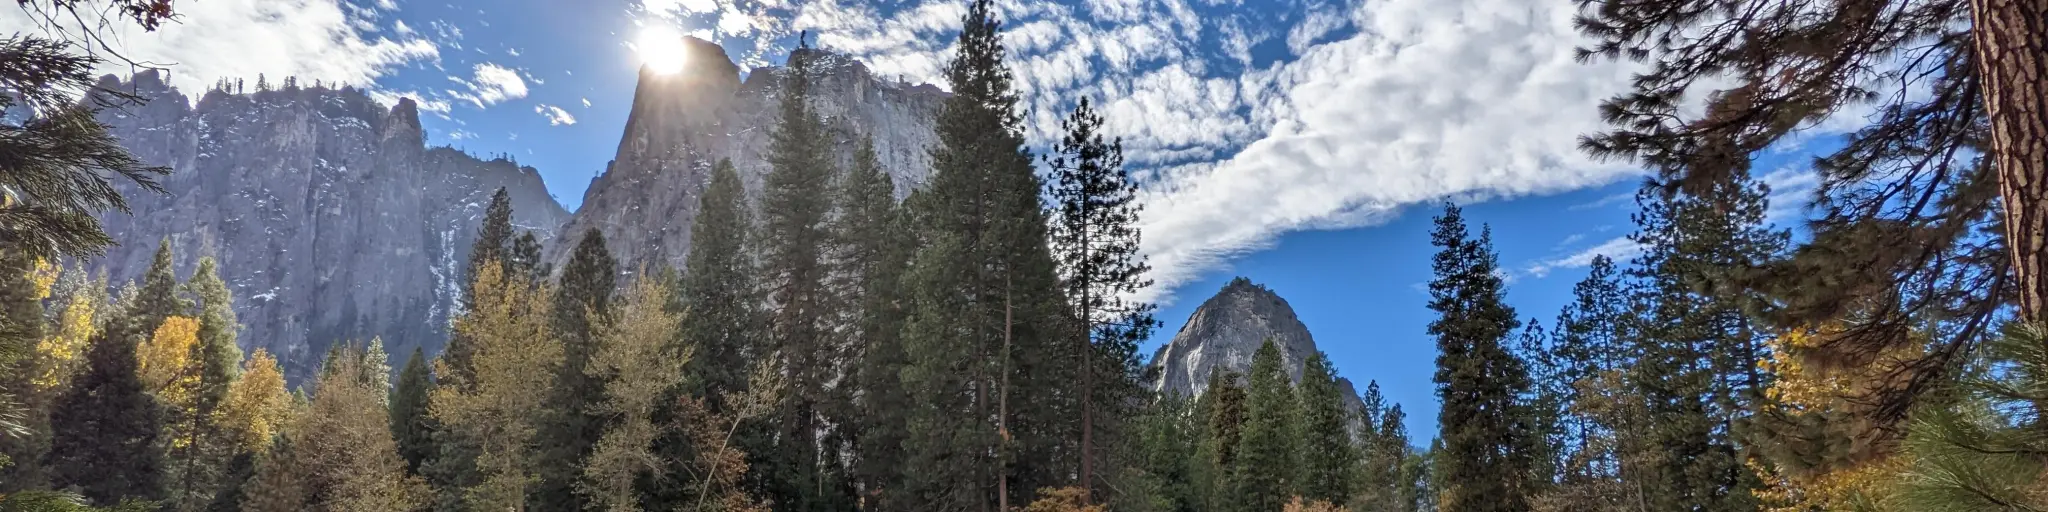 Winter view of the trees and cliffs of Yosemite on a autumn day 